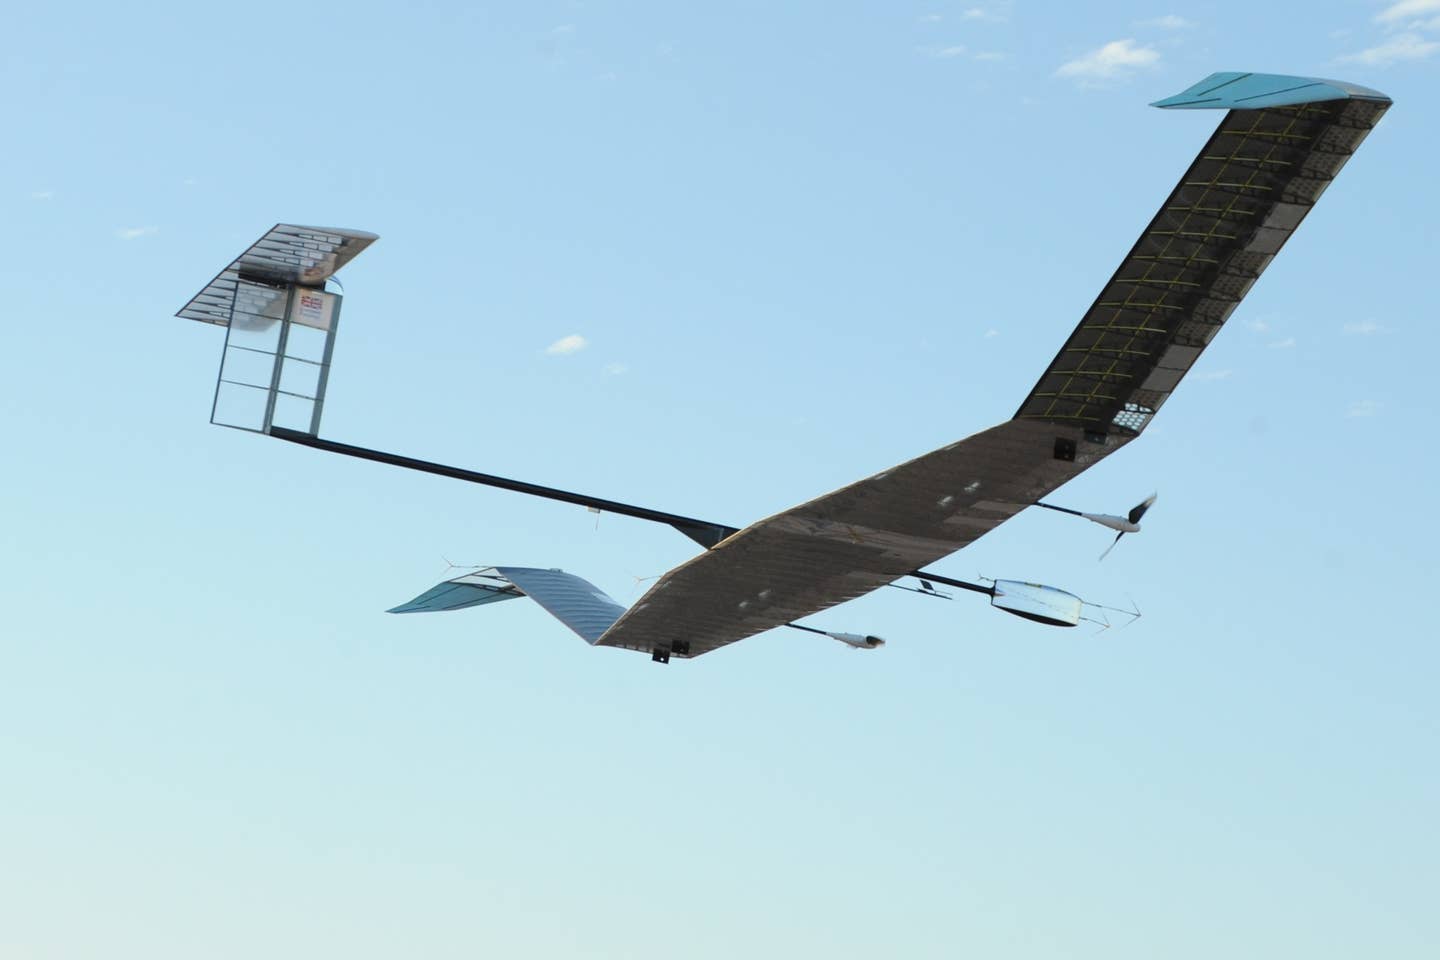 Zephyr is solar-powered and soars on wings that span 75 feet from tip to tip. <em>Airbus</em>